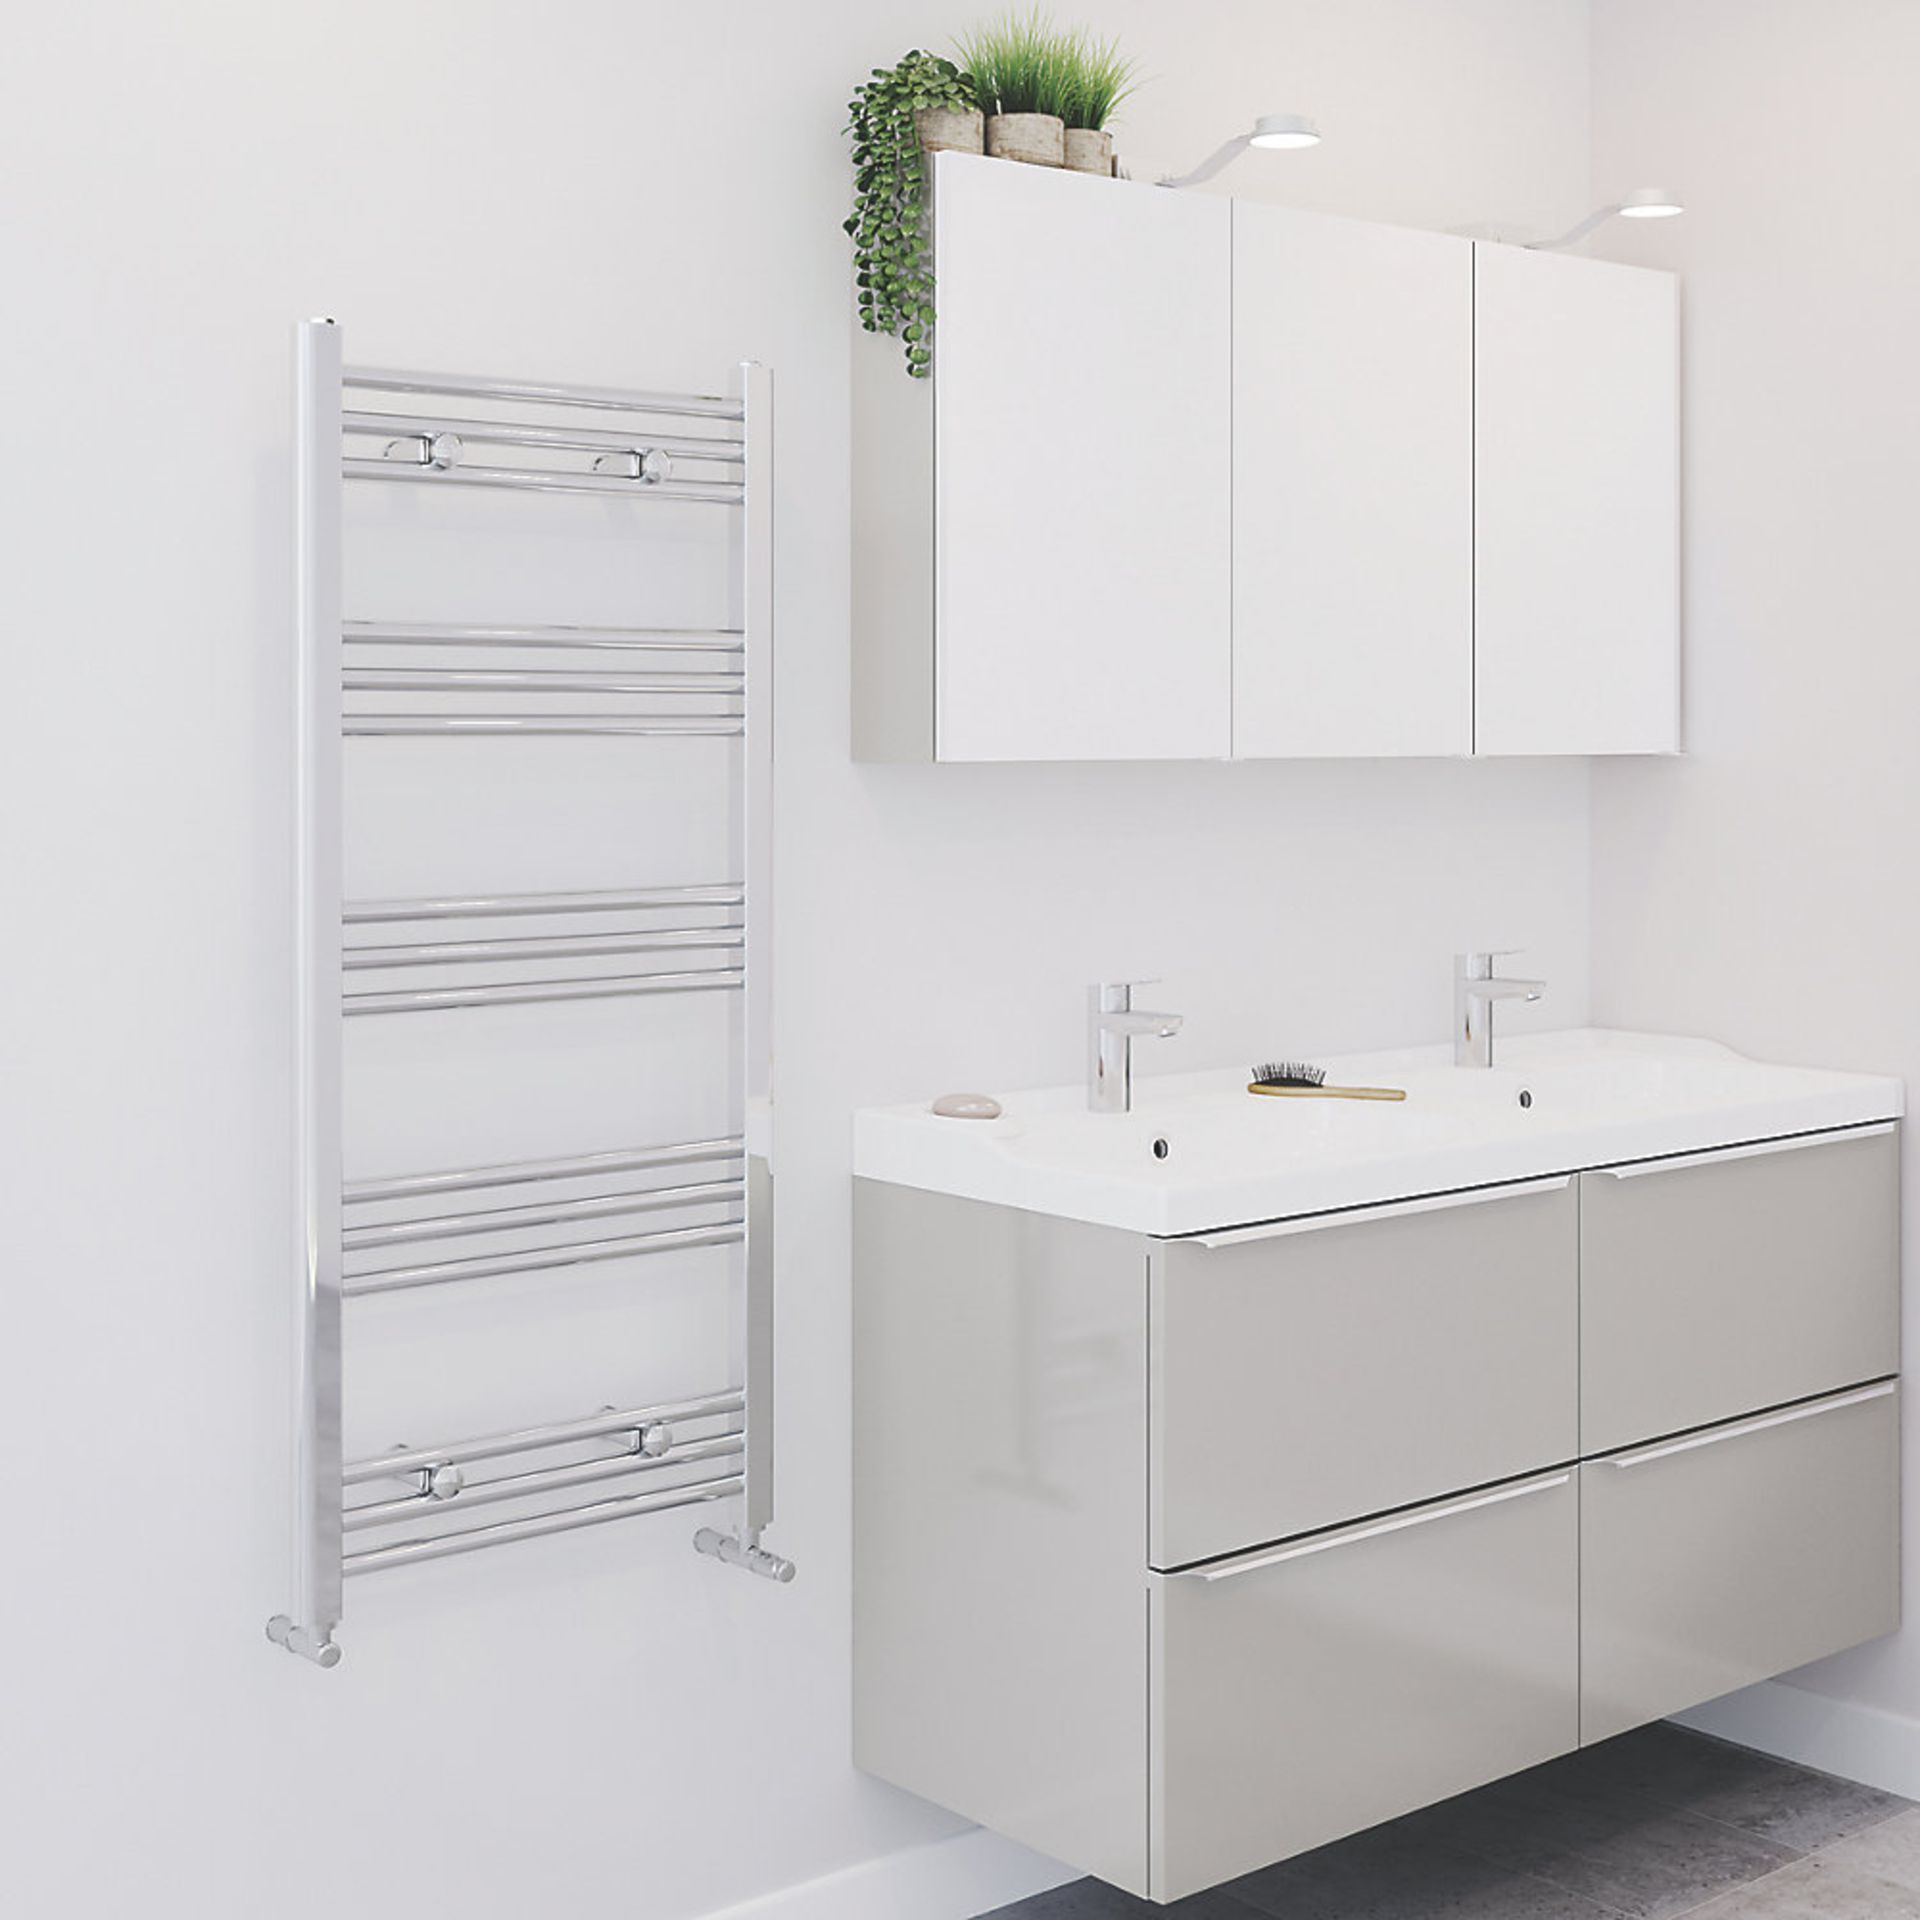 (QQ54) 1100x500mm Flat Chrome Towel Radiator. RRP £164.99. Mild steel construction with a